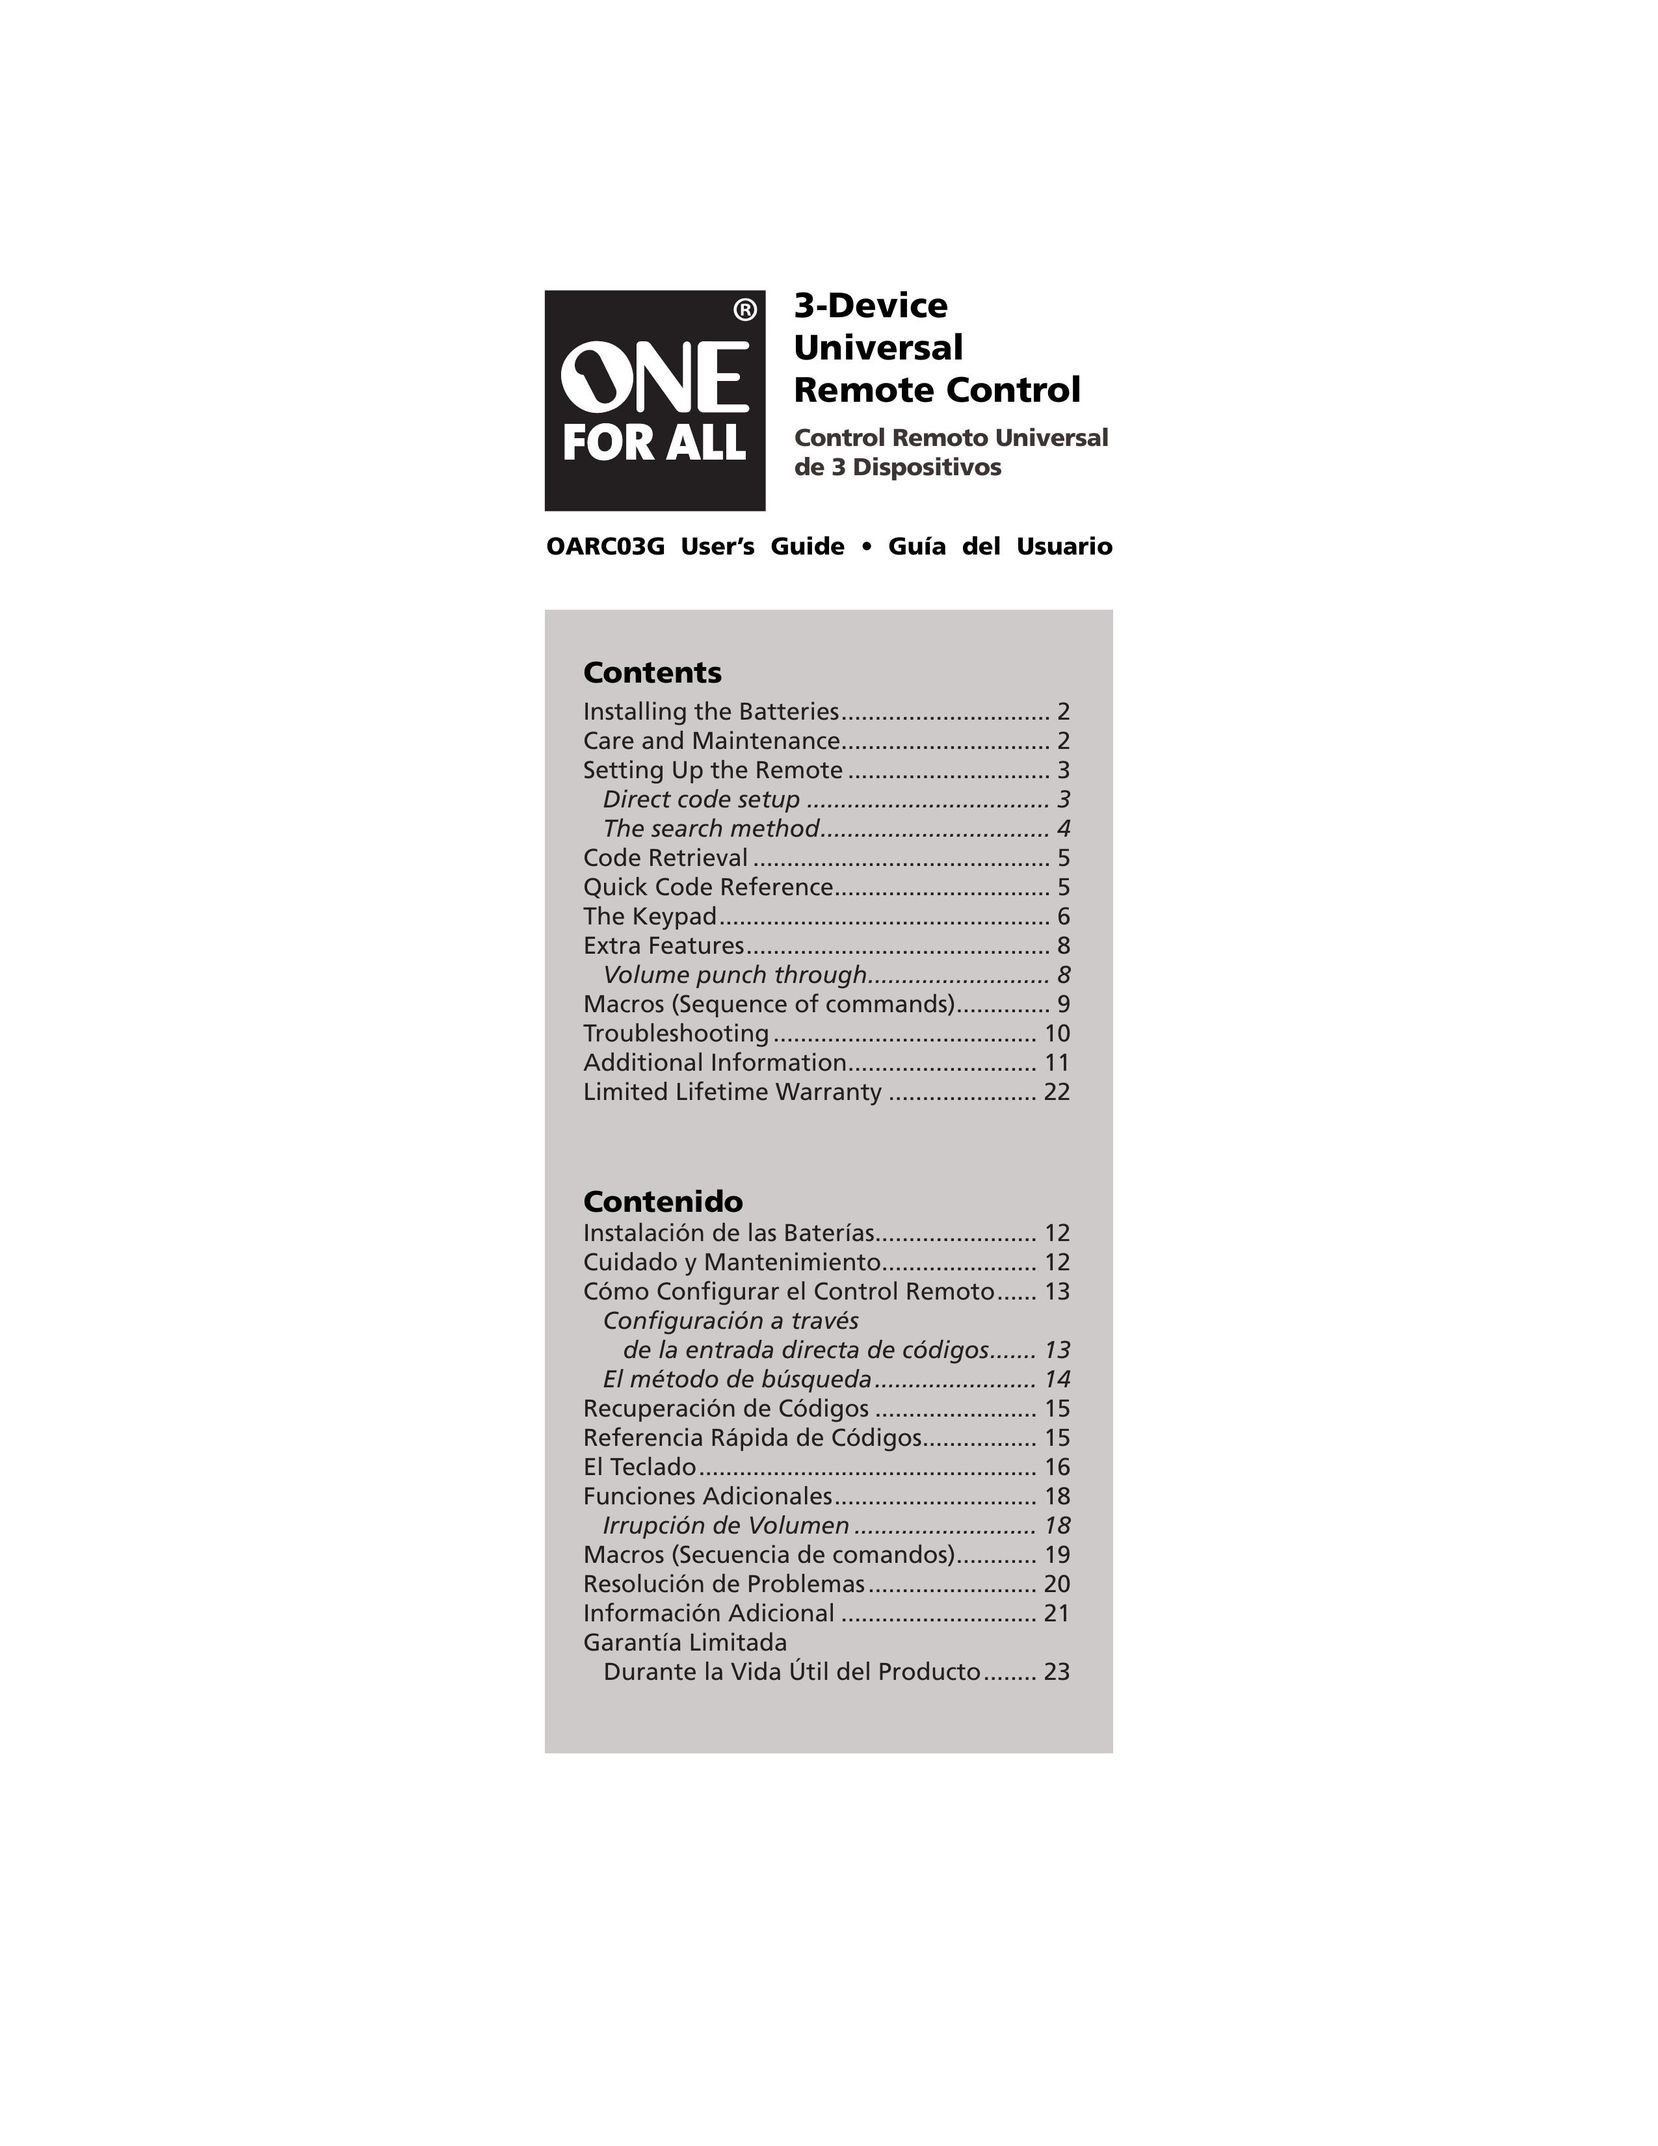 One for All OARH01B Universal Remote User Manual